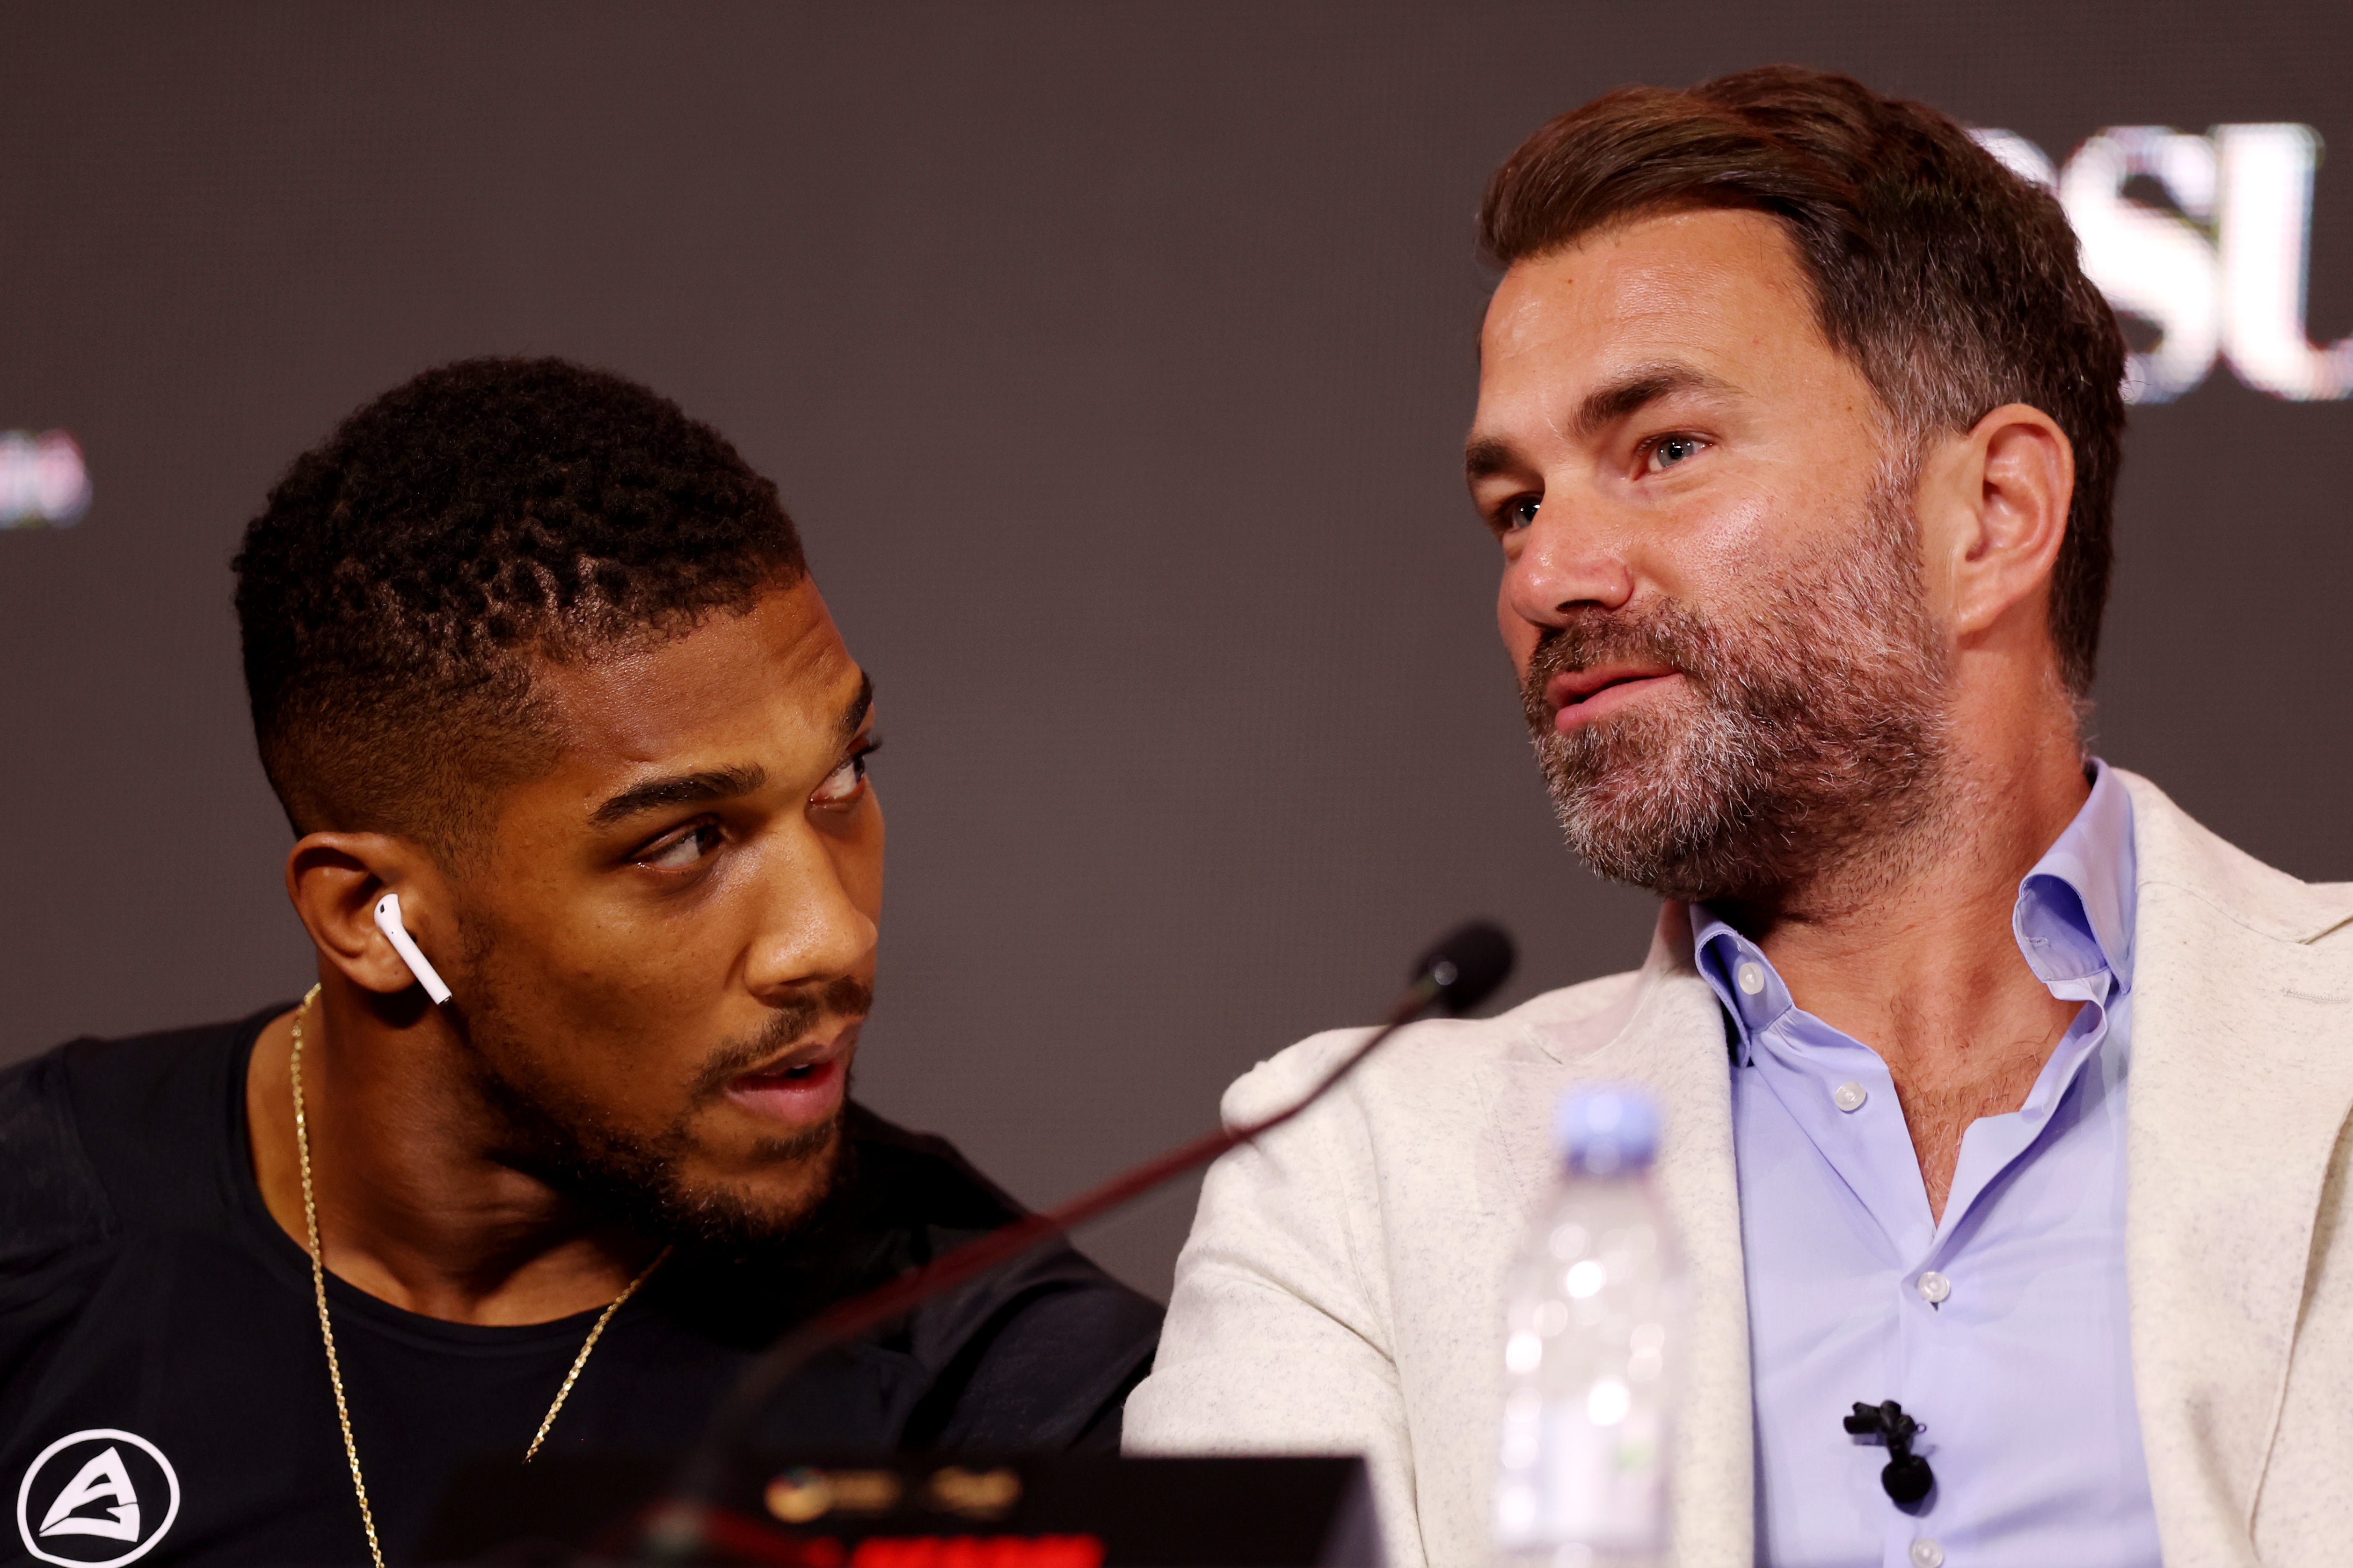 Anthony Joshua (left) with his promoter Eddie Hearn